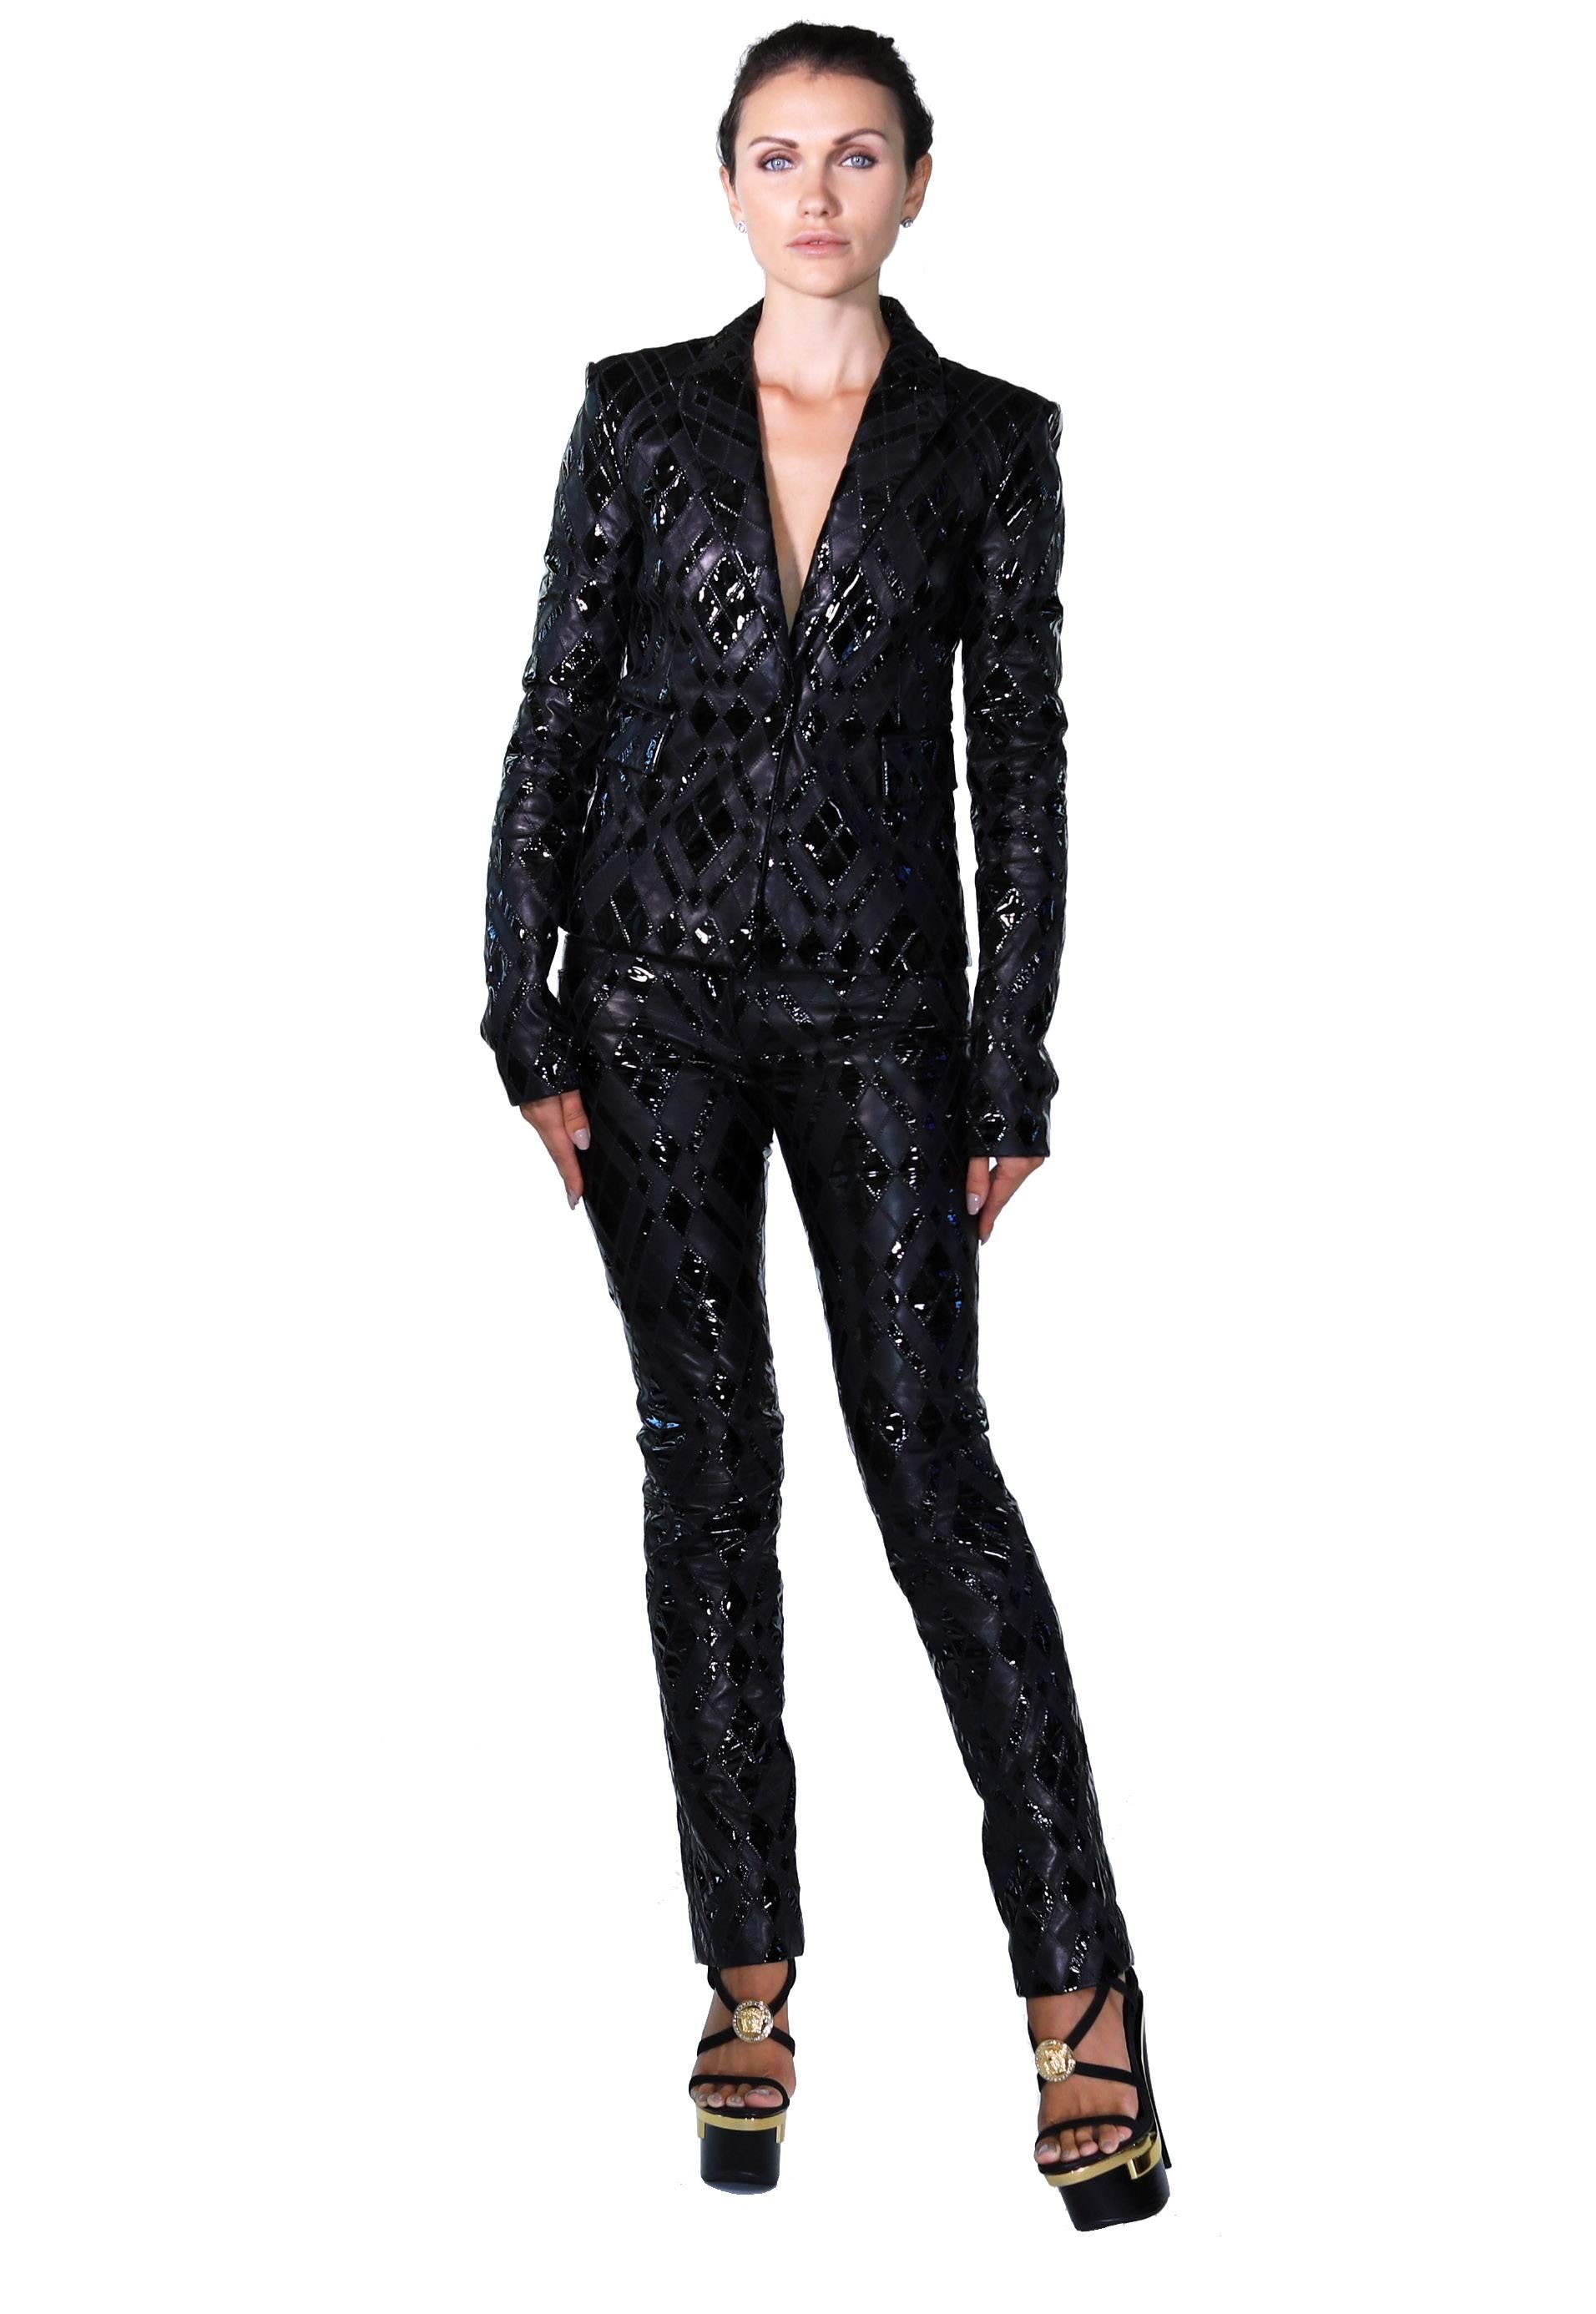 Brand New 



VERSACE

Pant Suit

100% Leather

Patchwork

Fully lined

IT Size 38 - US 2

Brand New, with tags. Comes with Versace hanger and Versace travel garment bag.